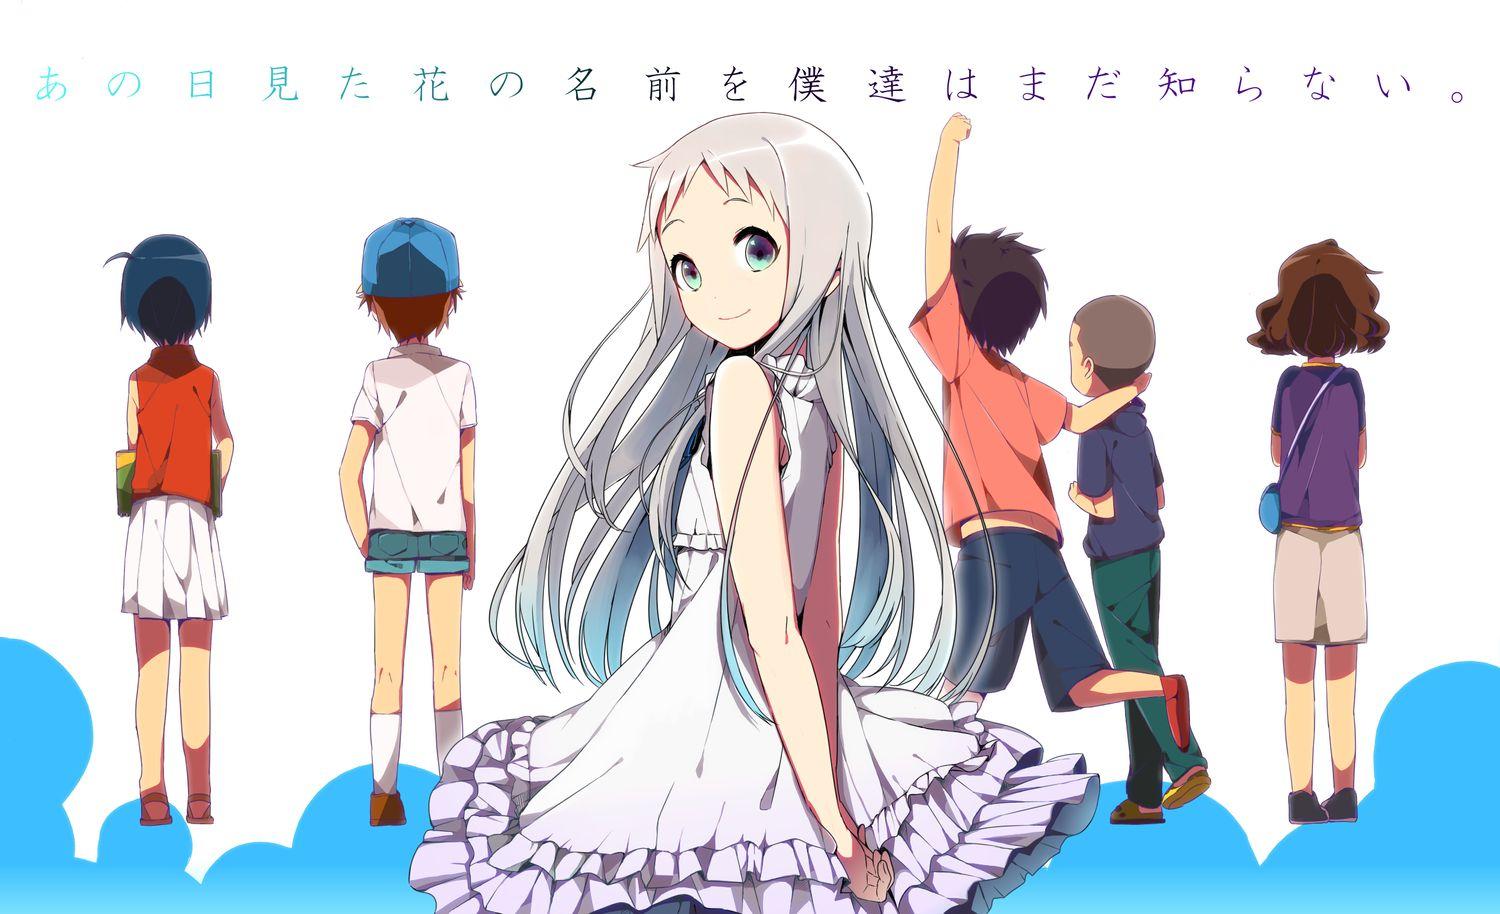 Anohana Wallpapers, Pictures, Image.